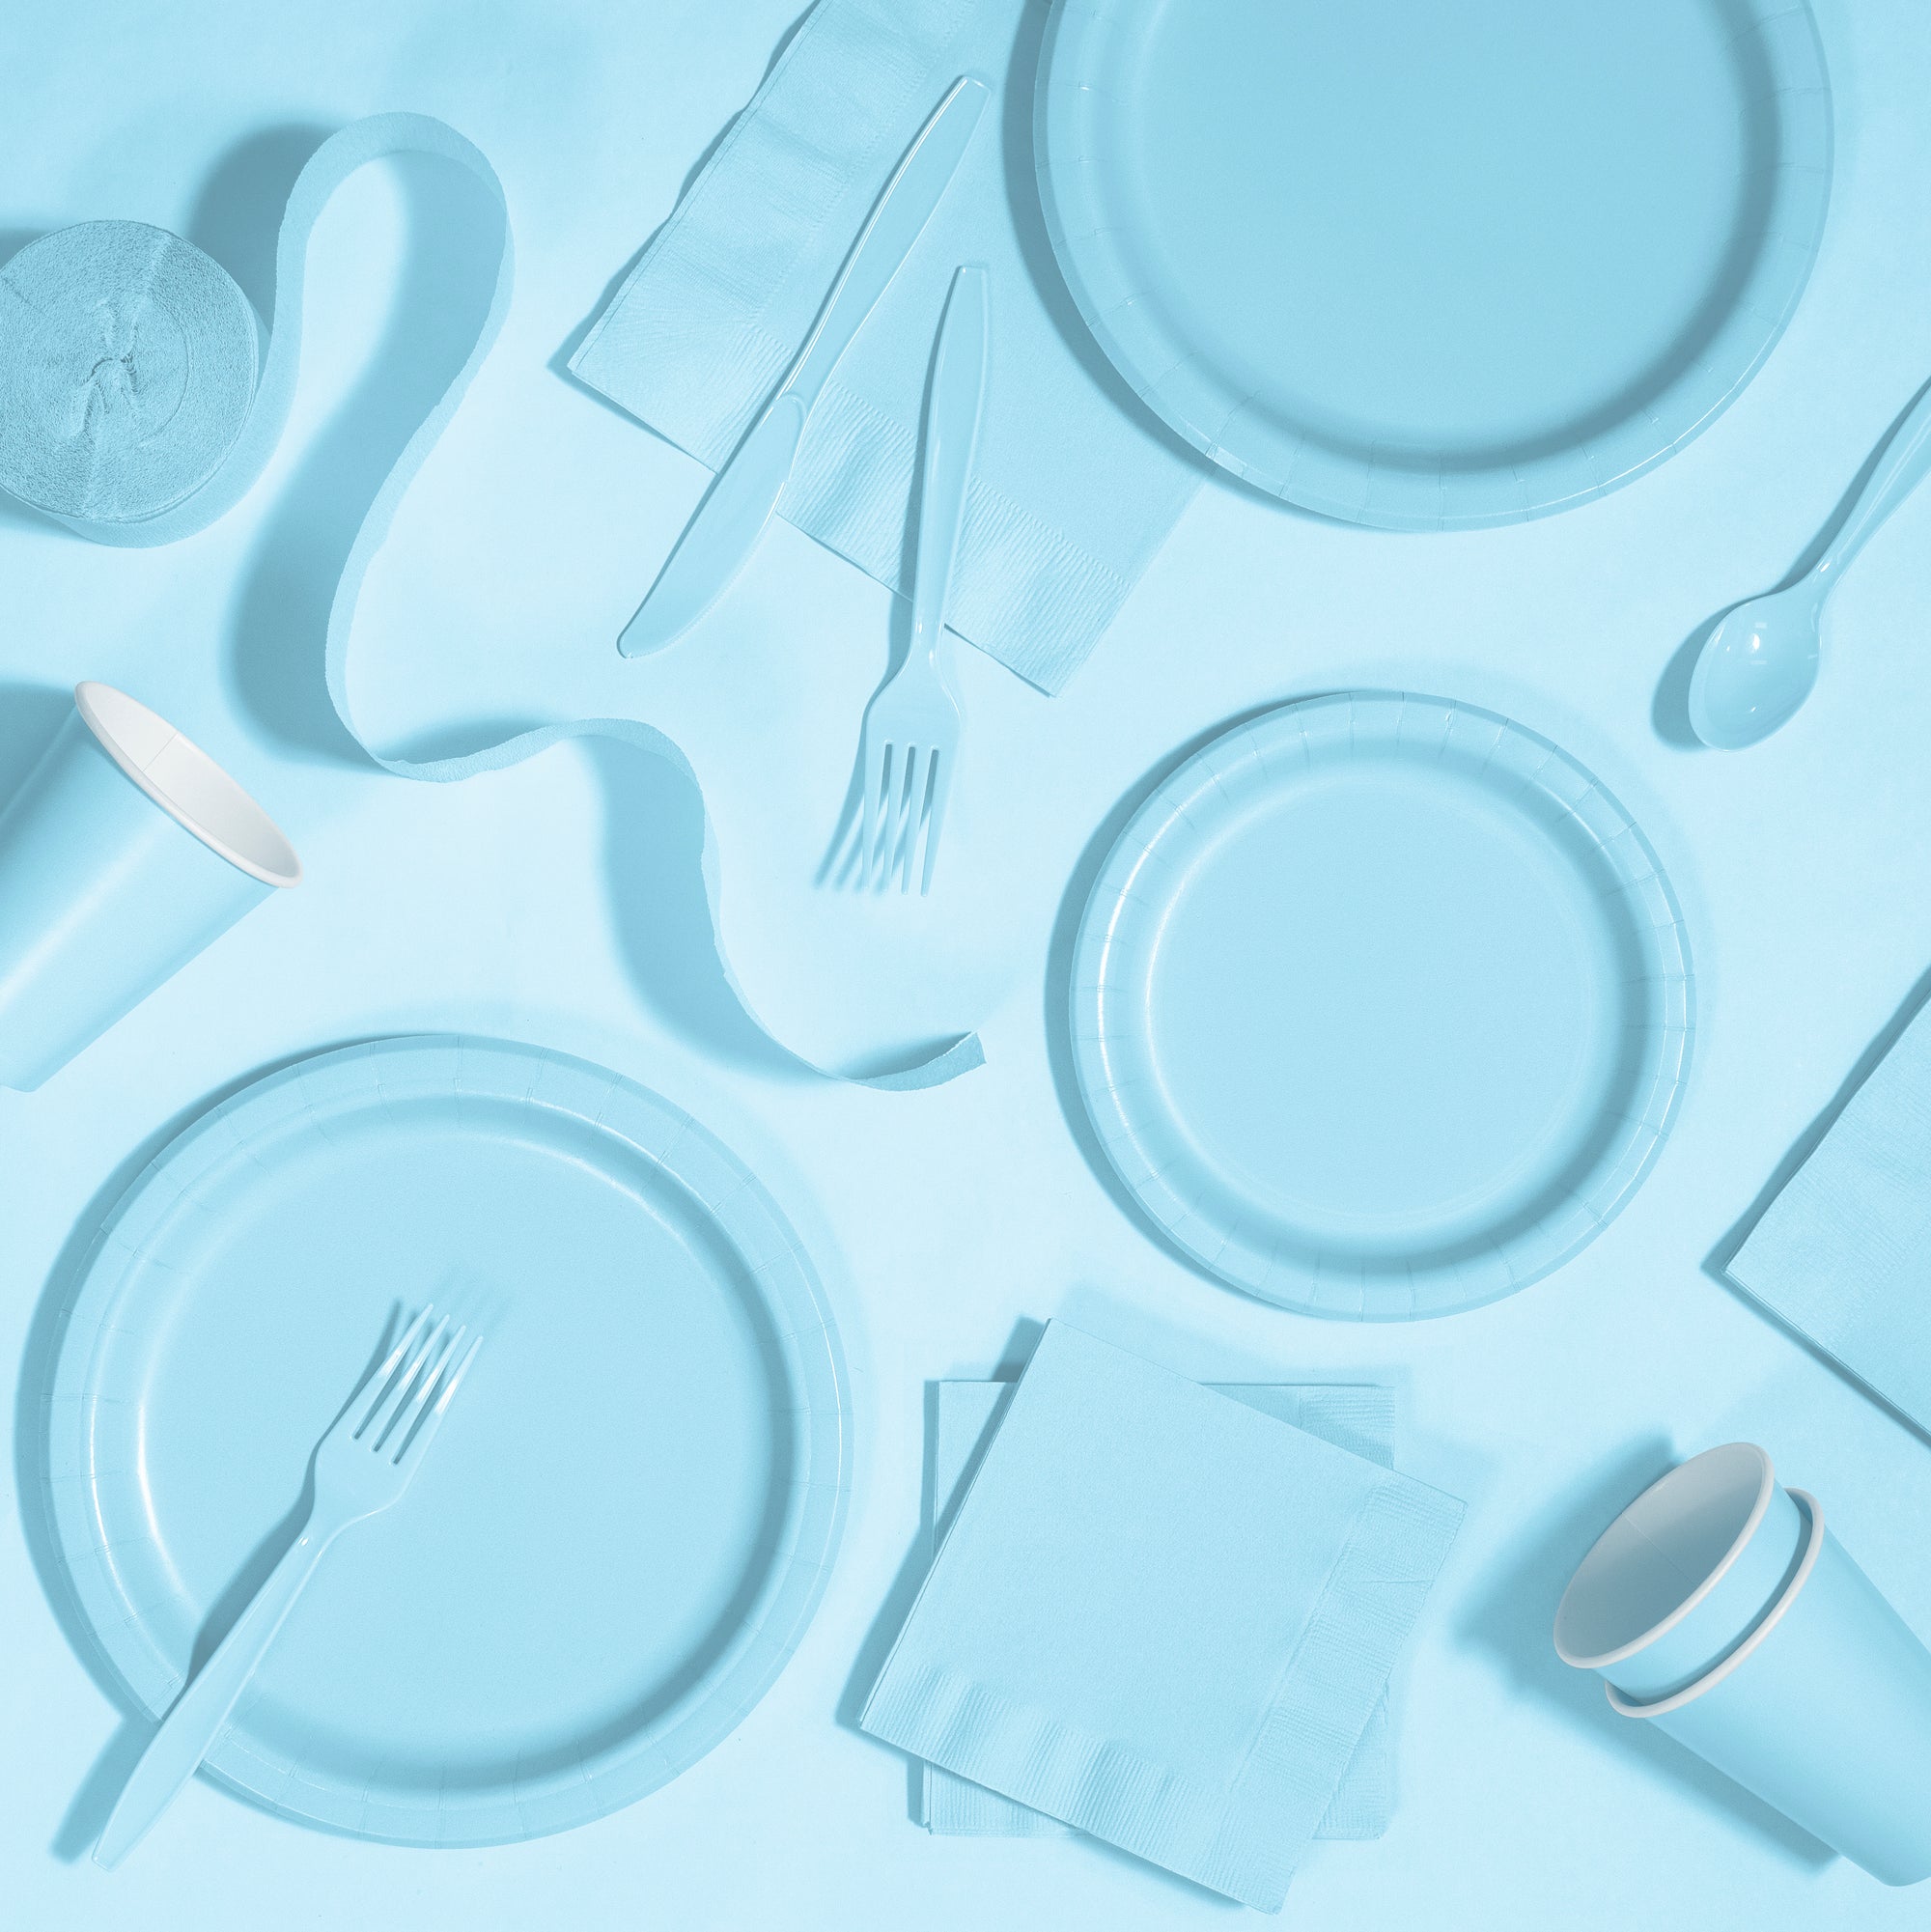 Pastel Light Blue Lunch Napkins 20ct | The Party Darling